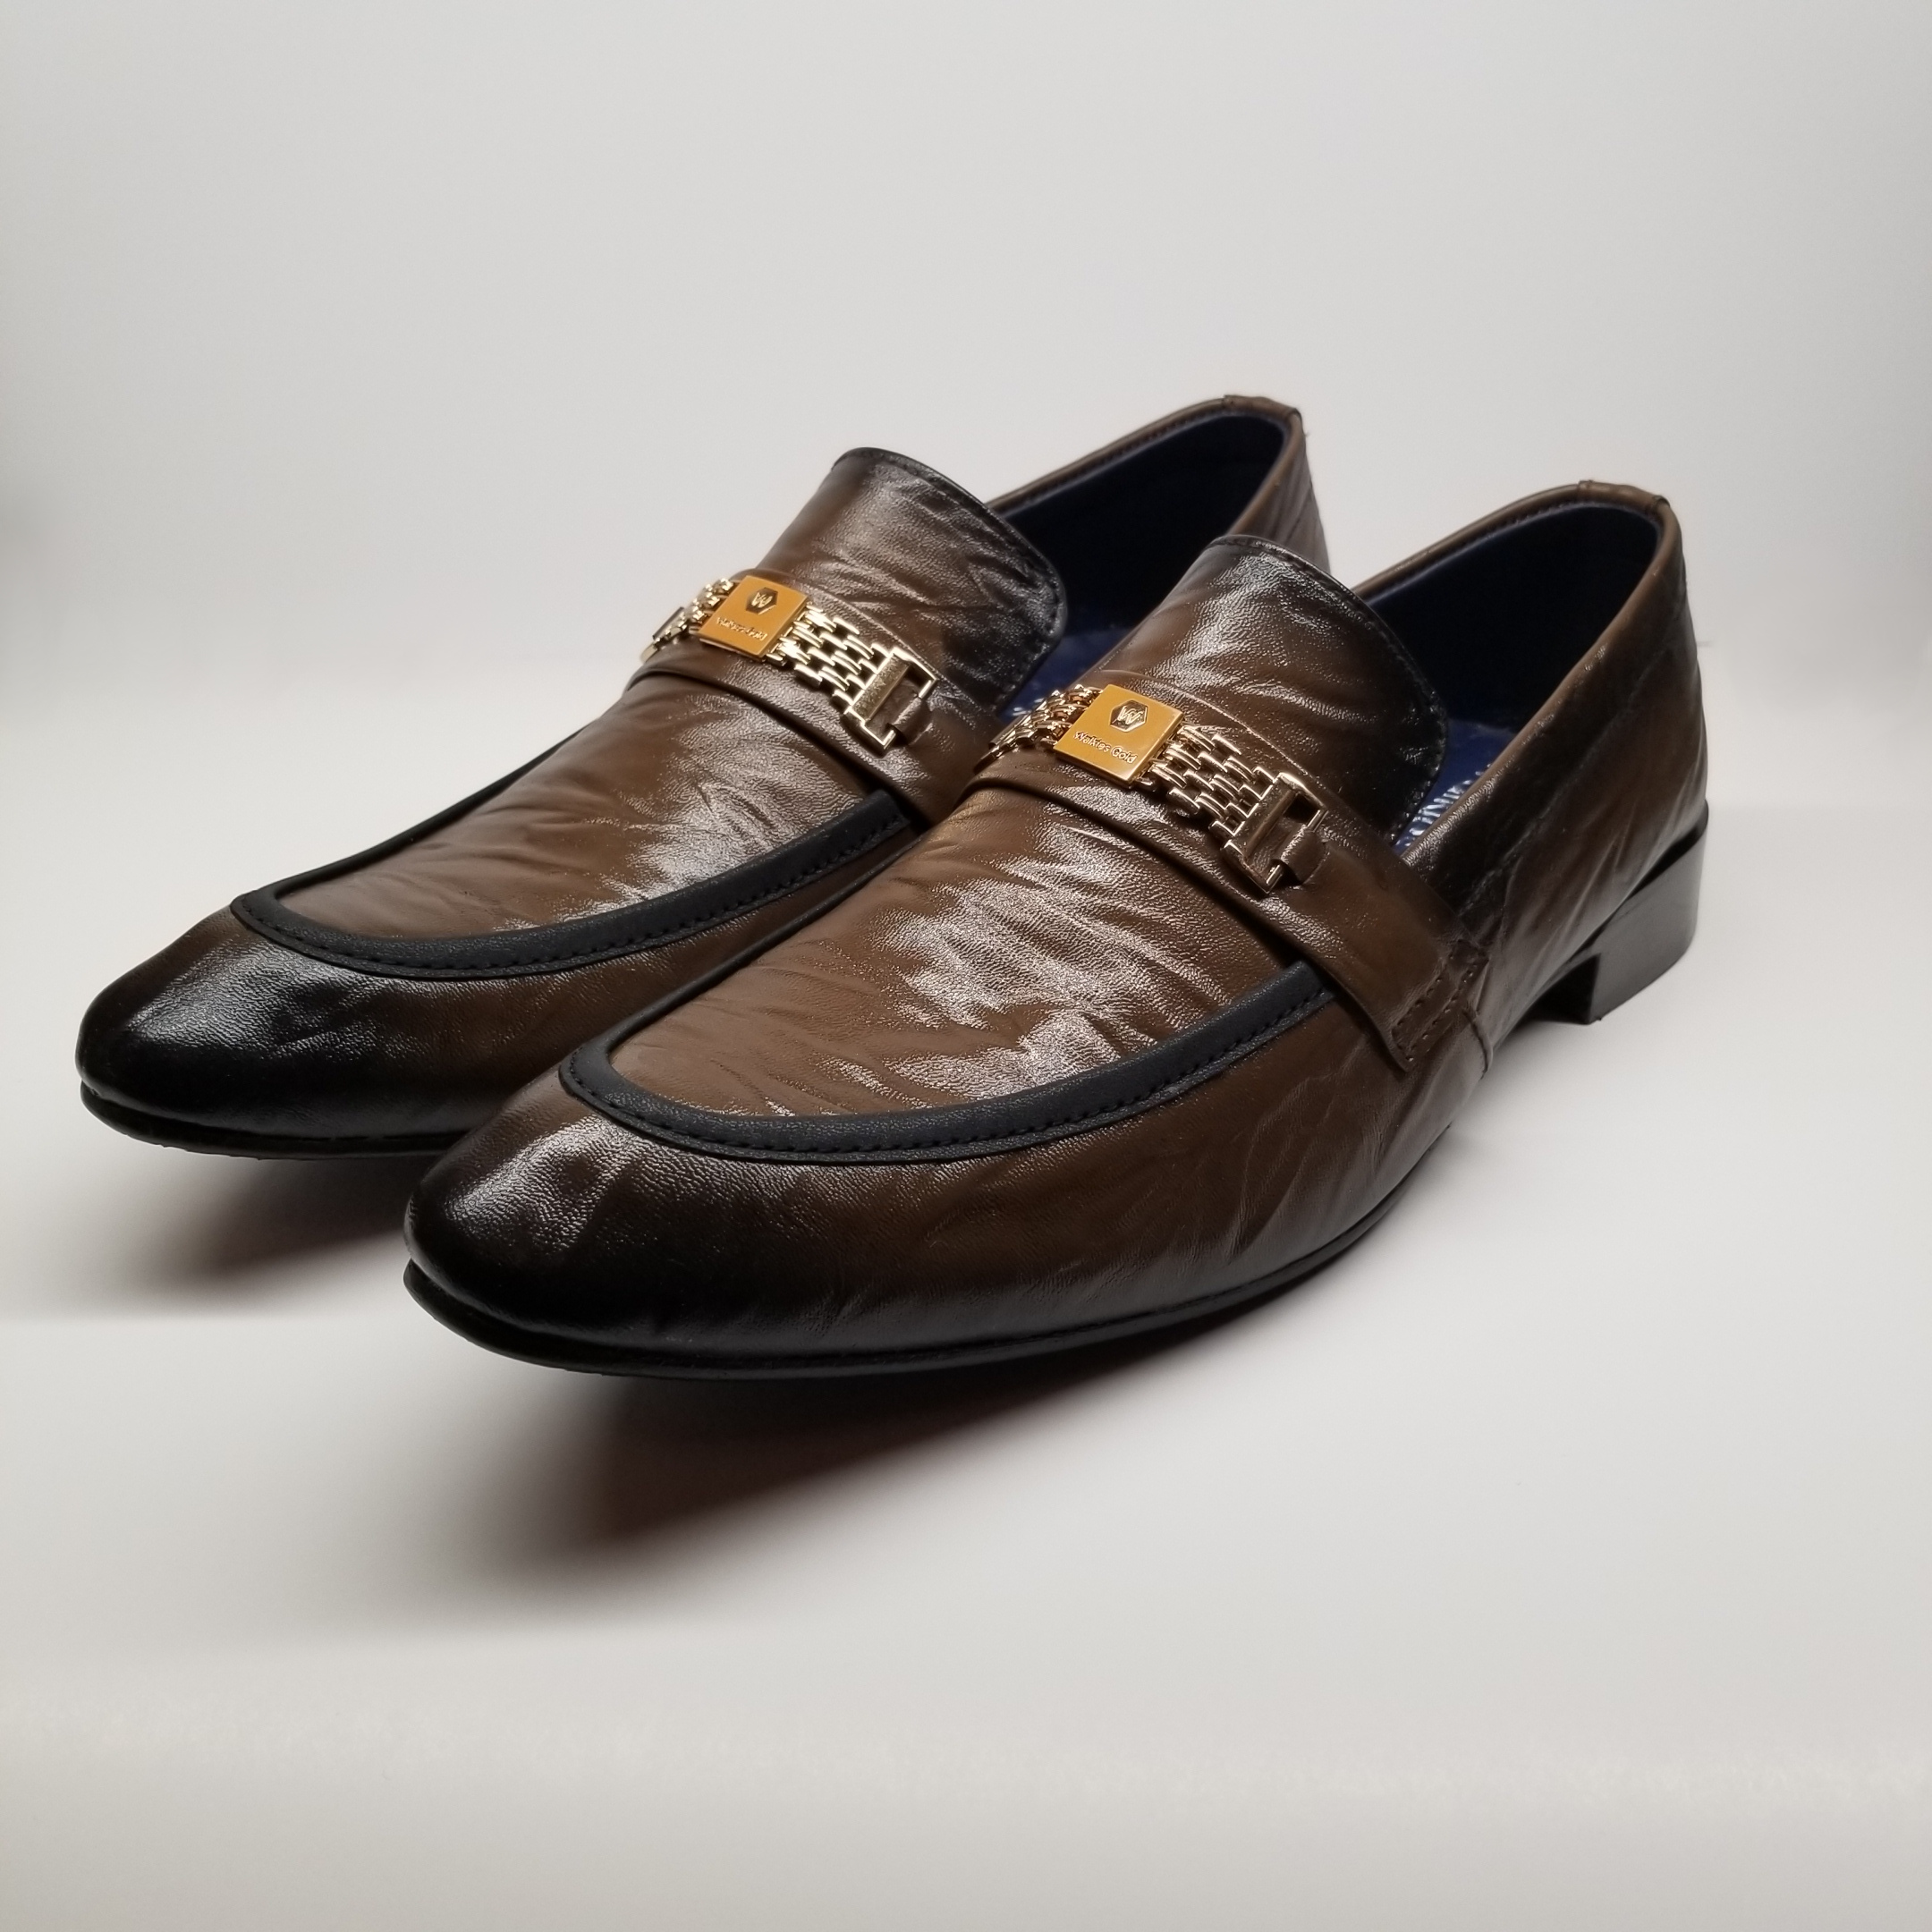 Legend dress shoes by Walkies at NMFootwear.com